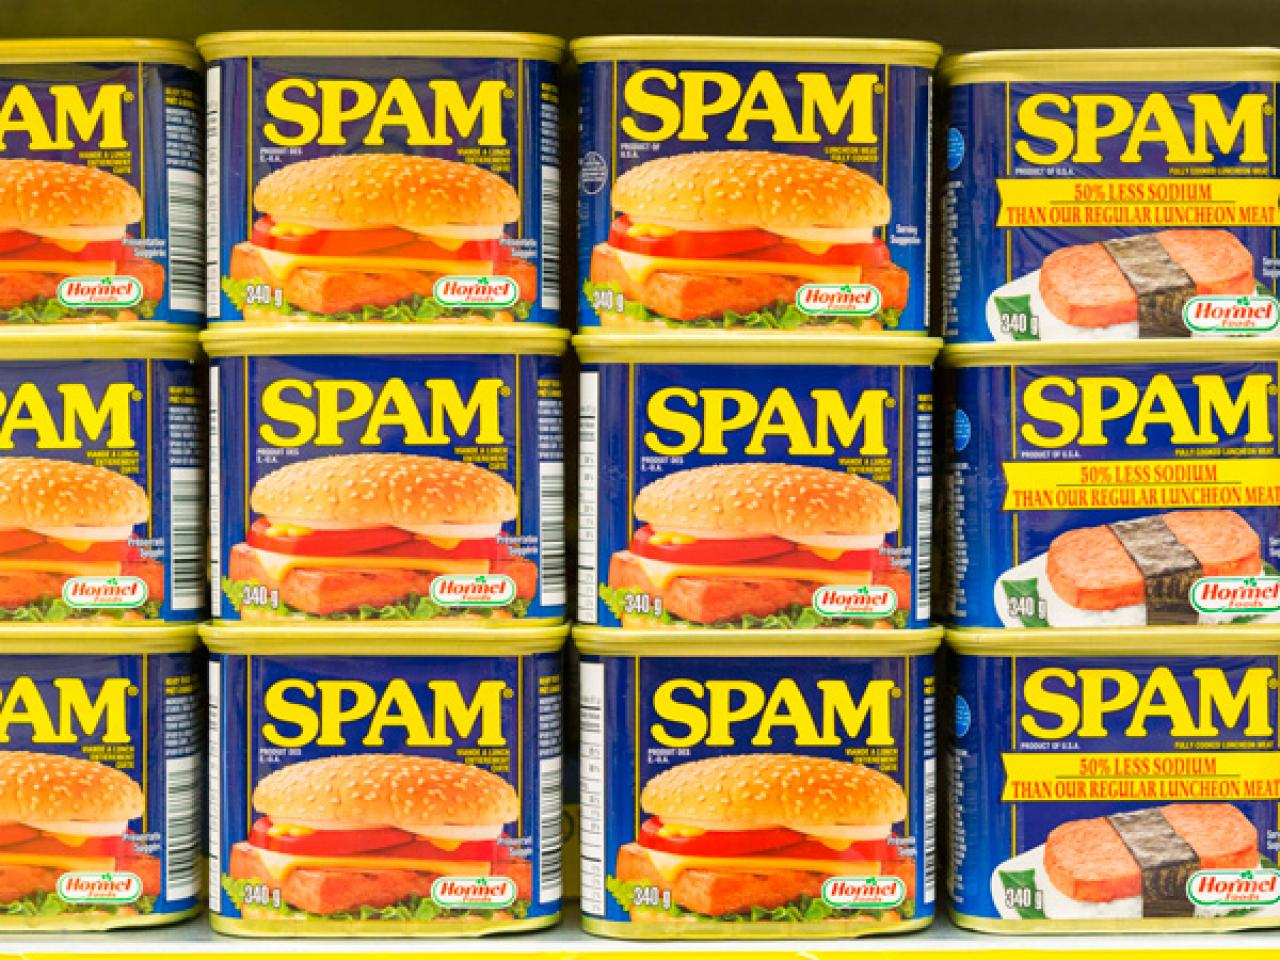 Spam Teriyaki Canned Meat 12 oz can